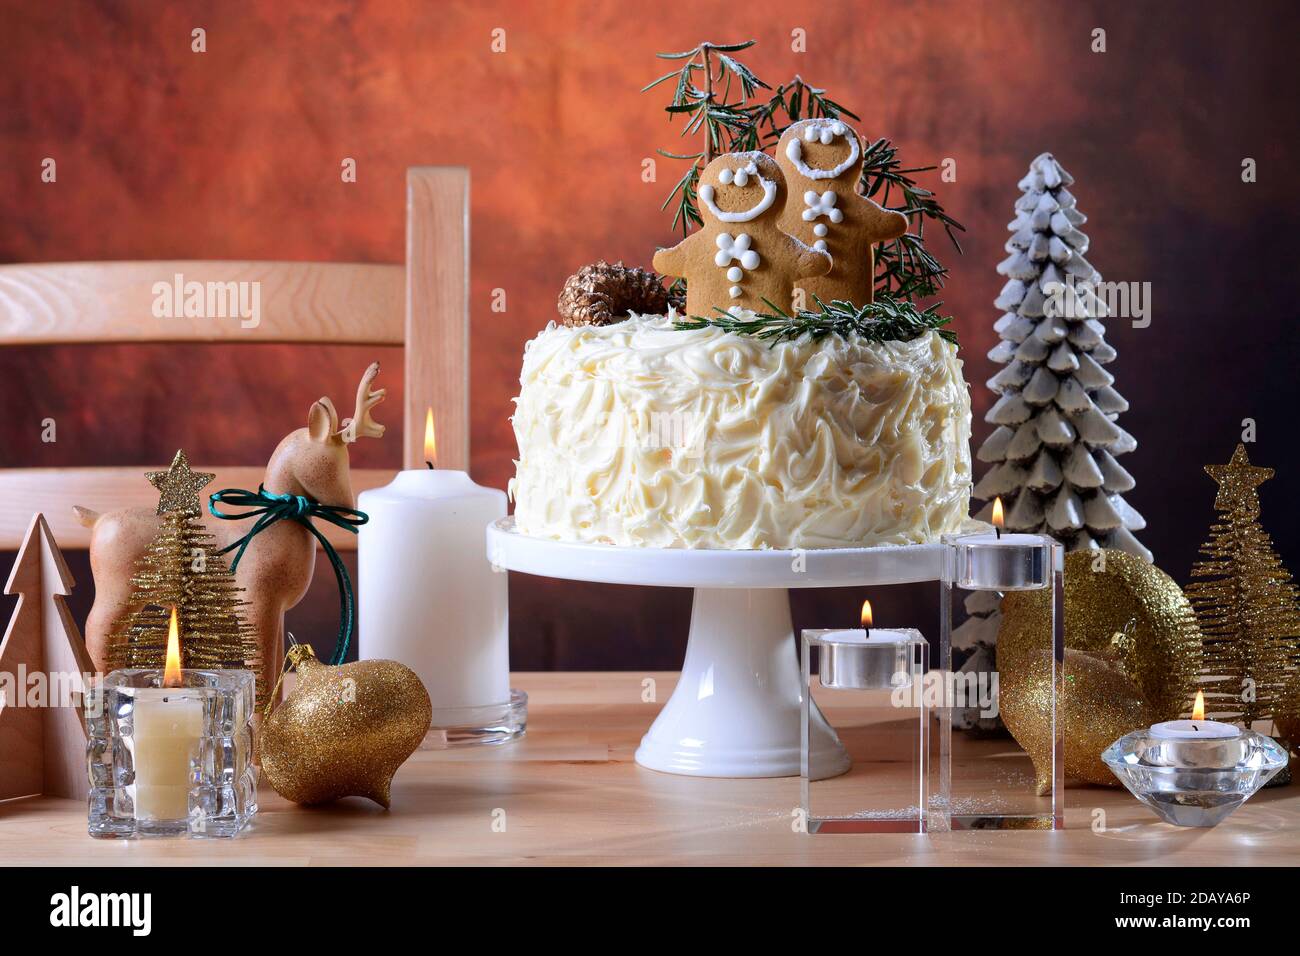 Christmas showstopper centerpiece white chocolate cake with ...